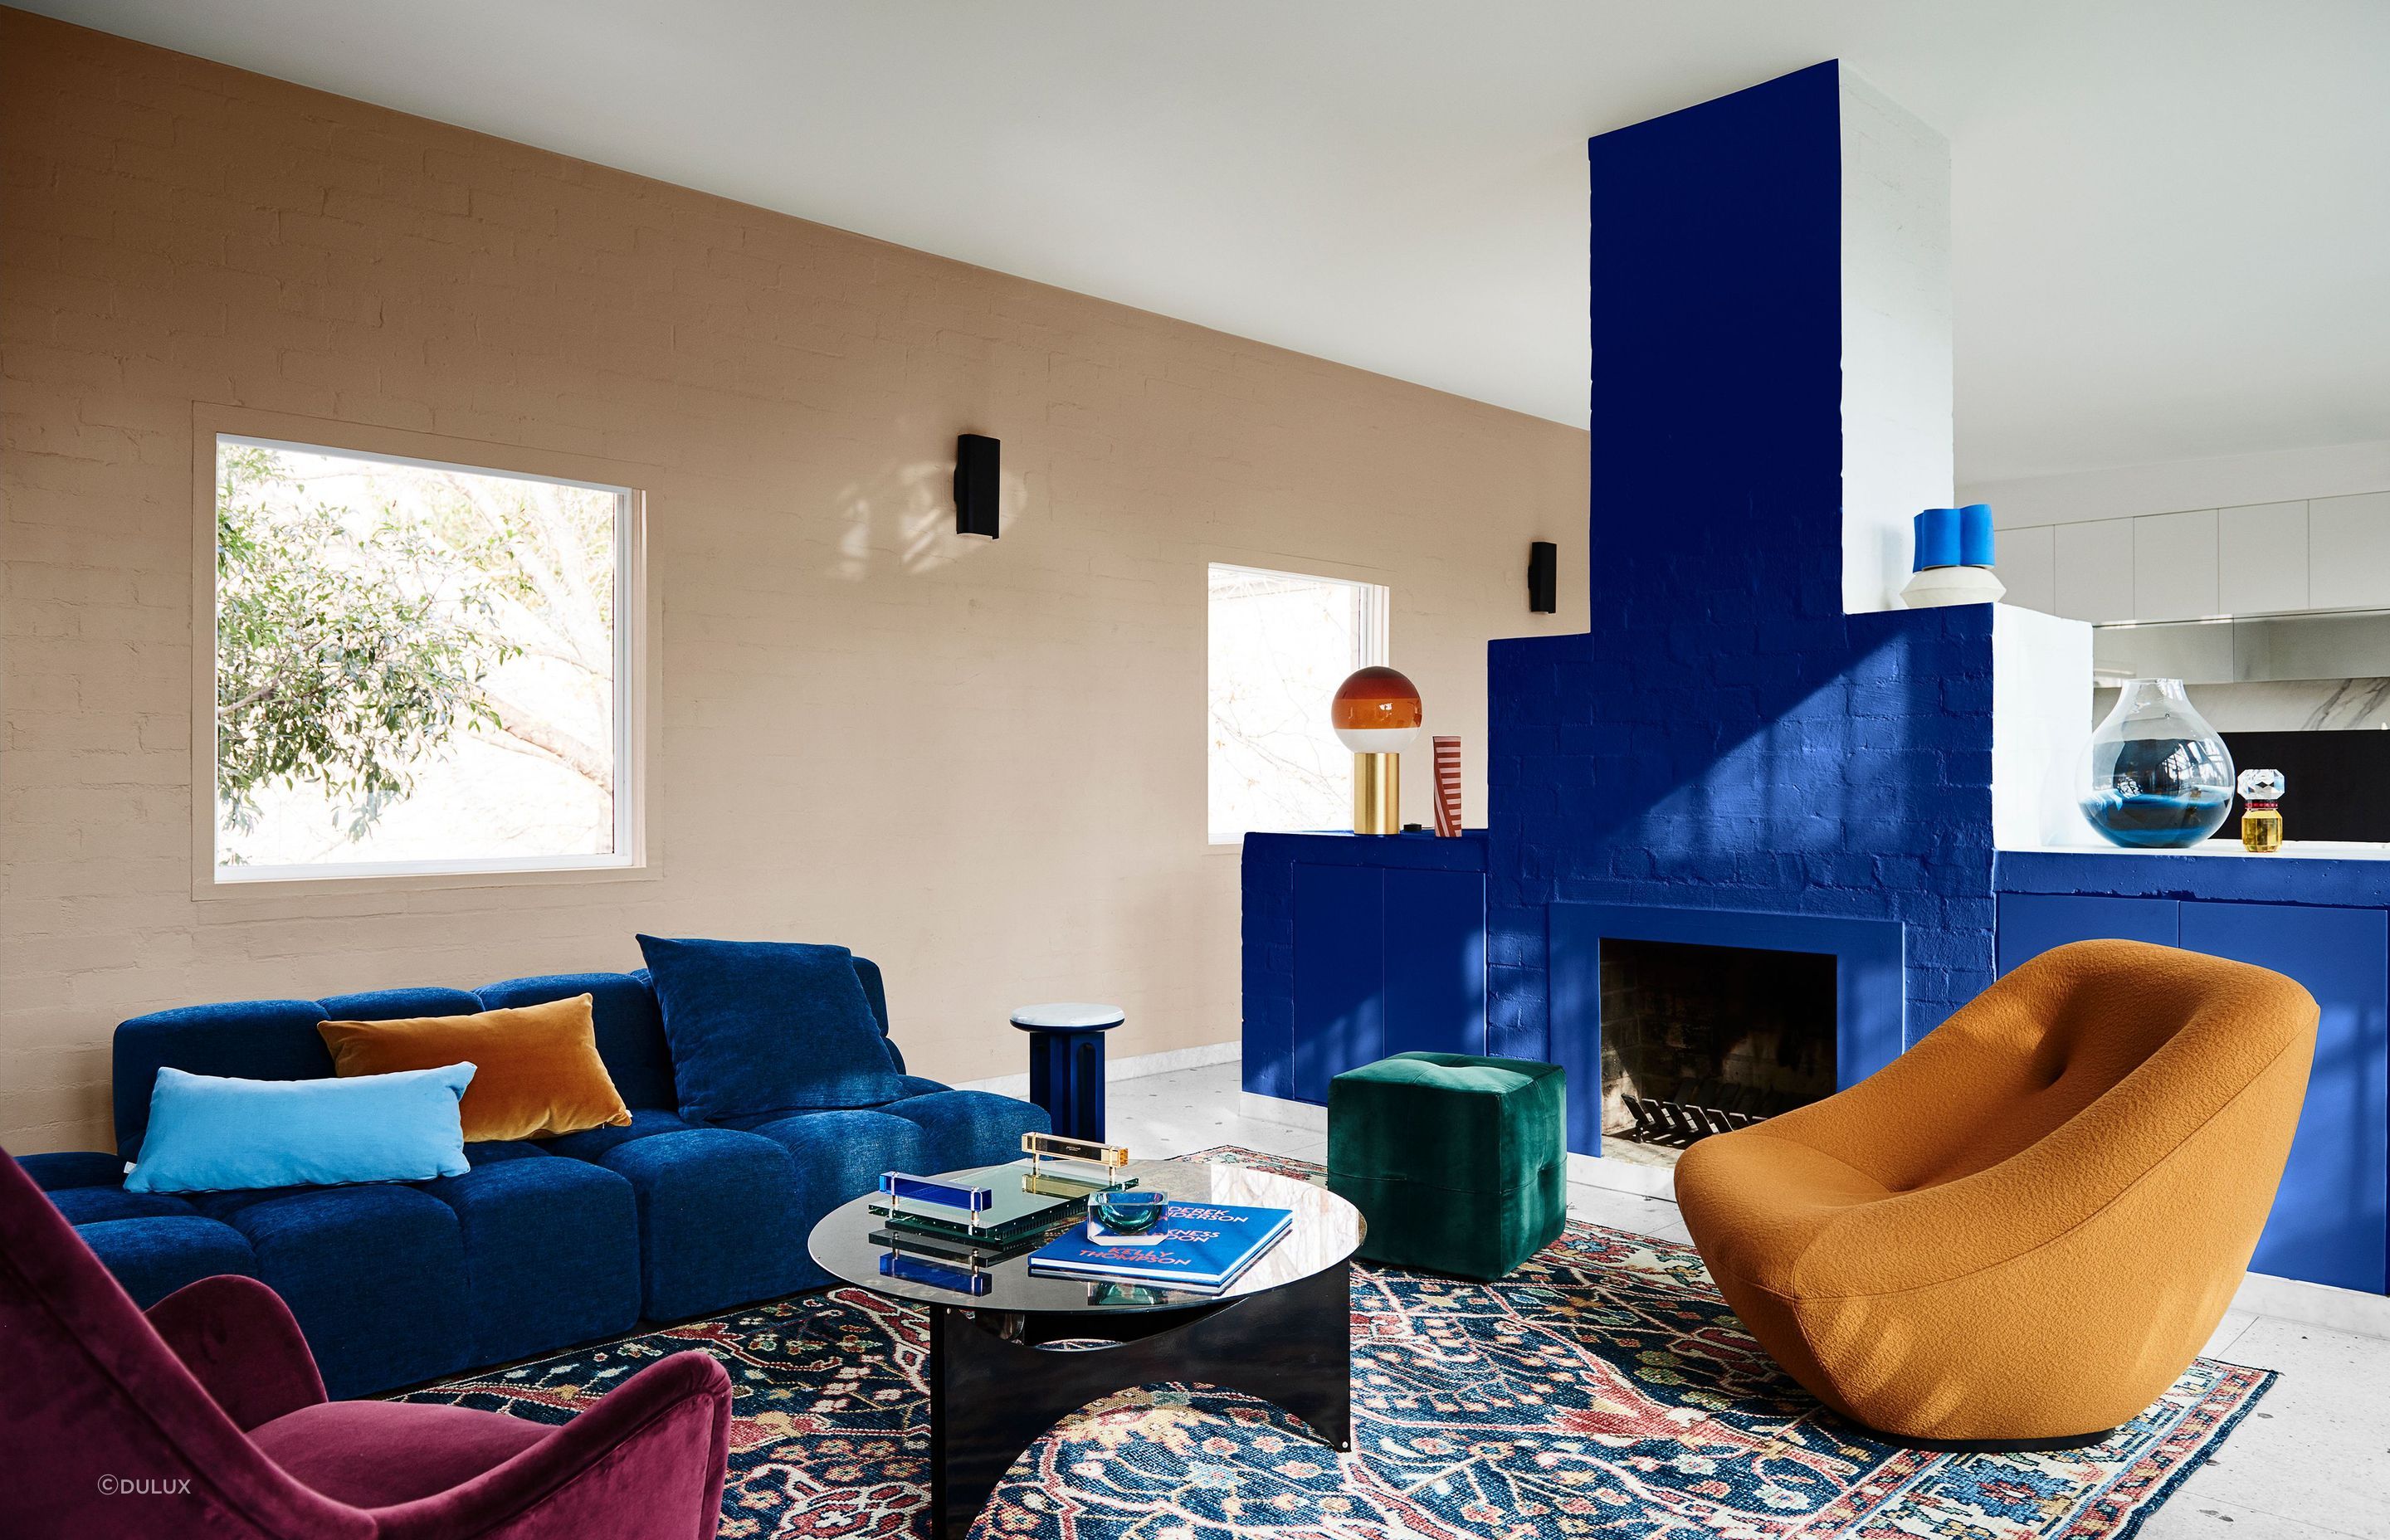 There are no unbreakable rules when it comes to colour: if you like a scheme, it's good.